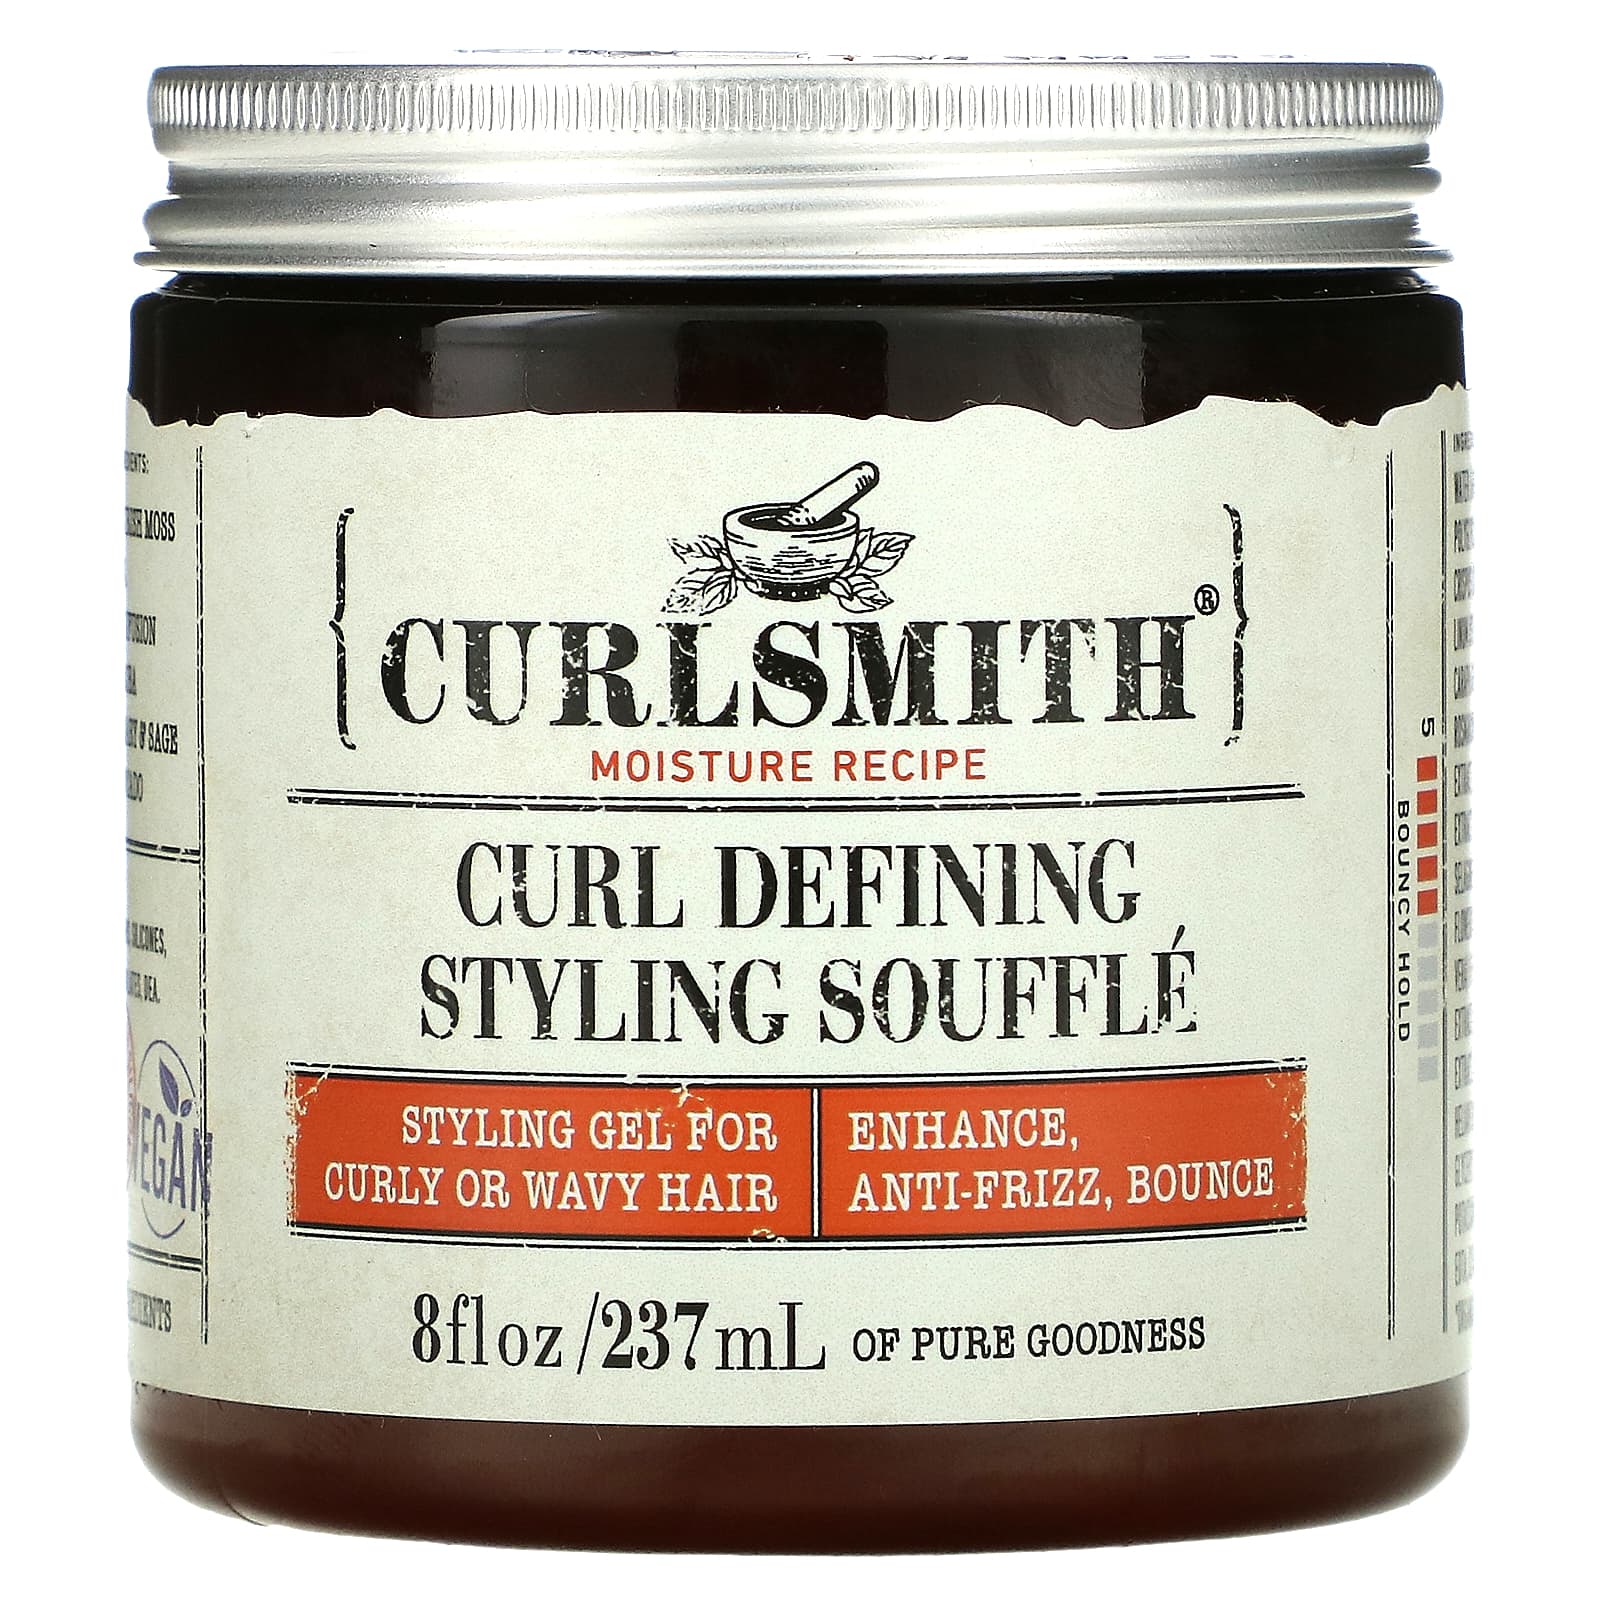 Curlsmith curl defining styling souffle spider woman cosplay